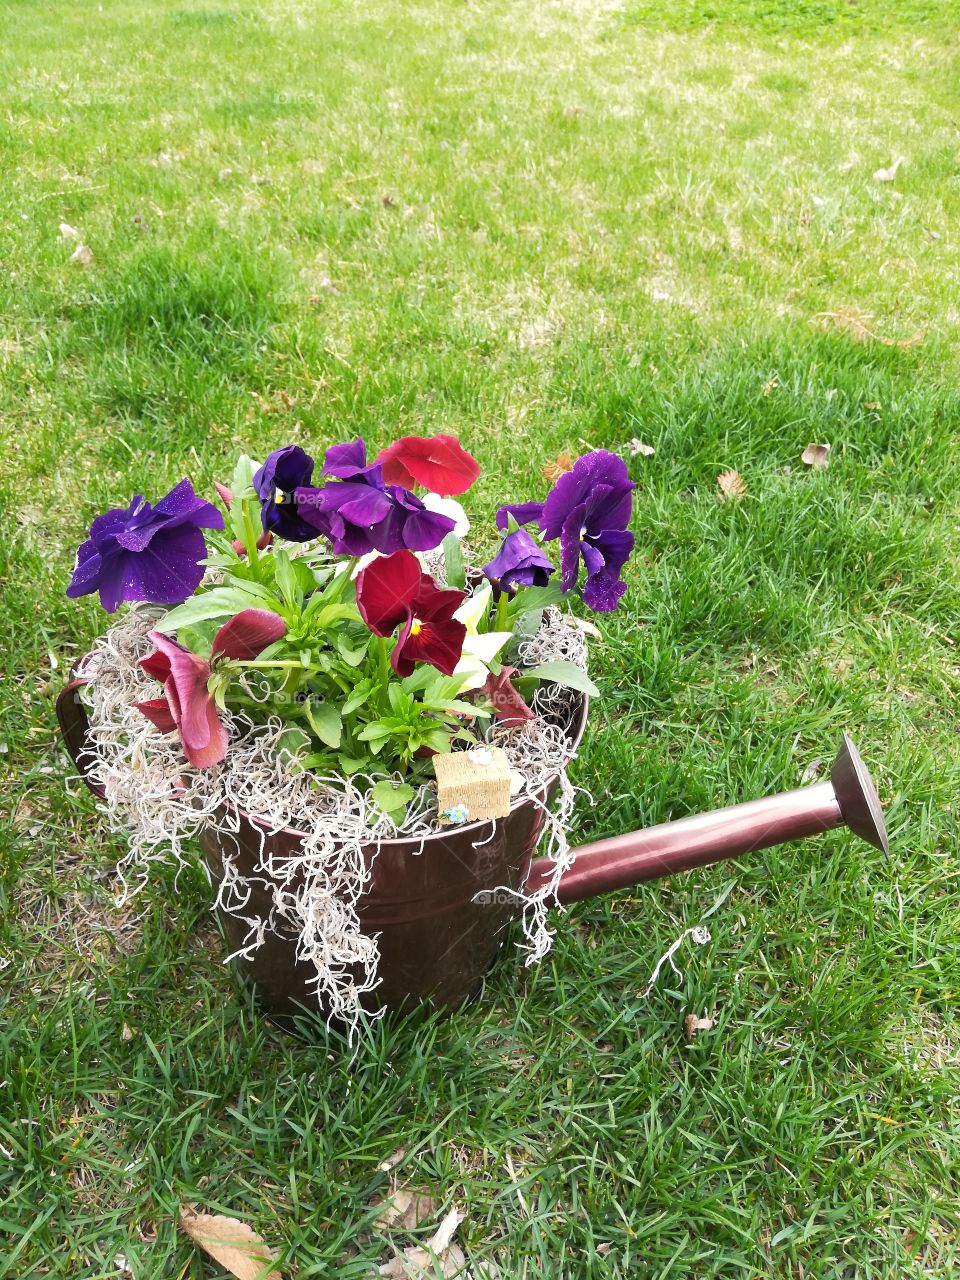 A beautiful spring flower display, featuring pansies and a watering can in a fresh green lawn.